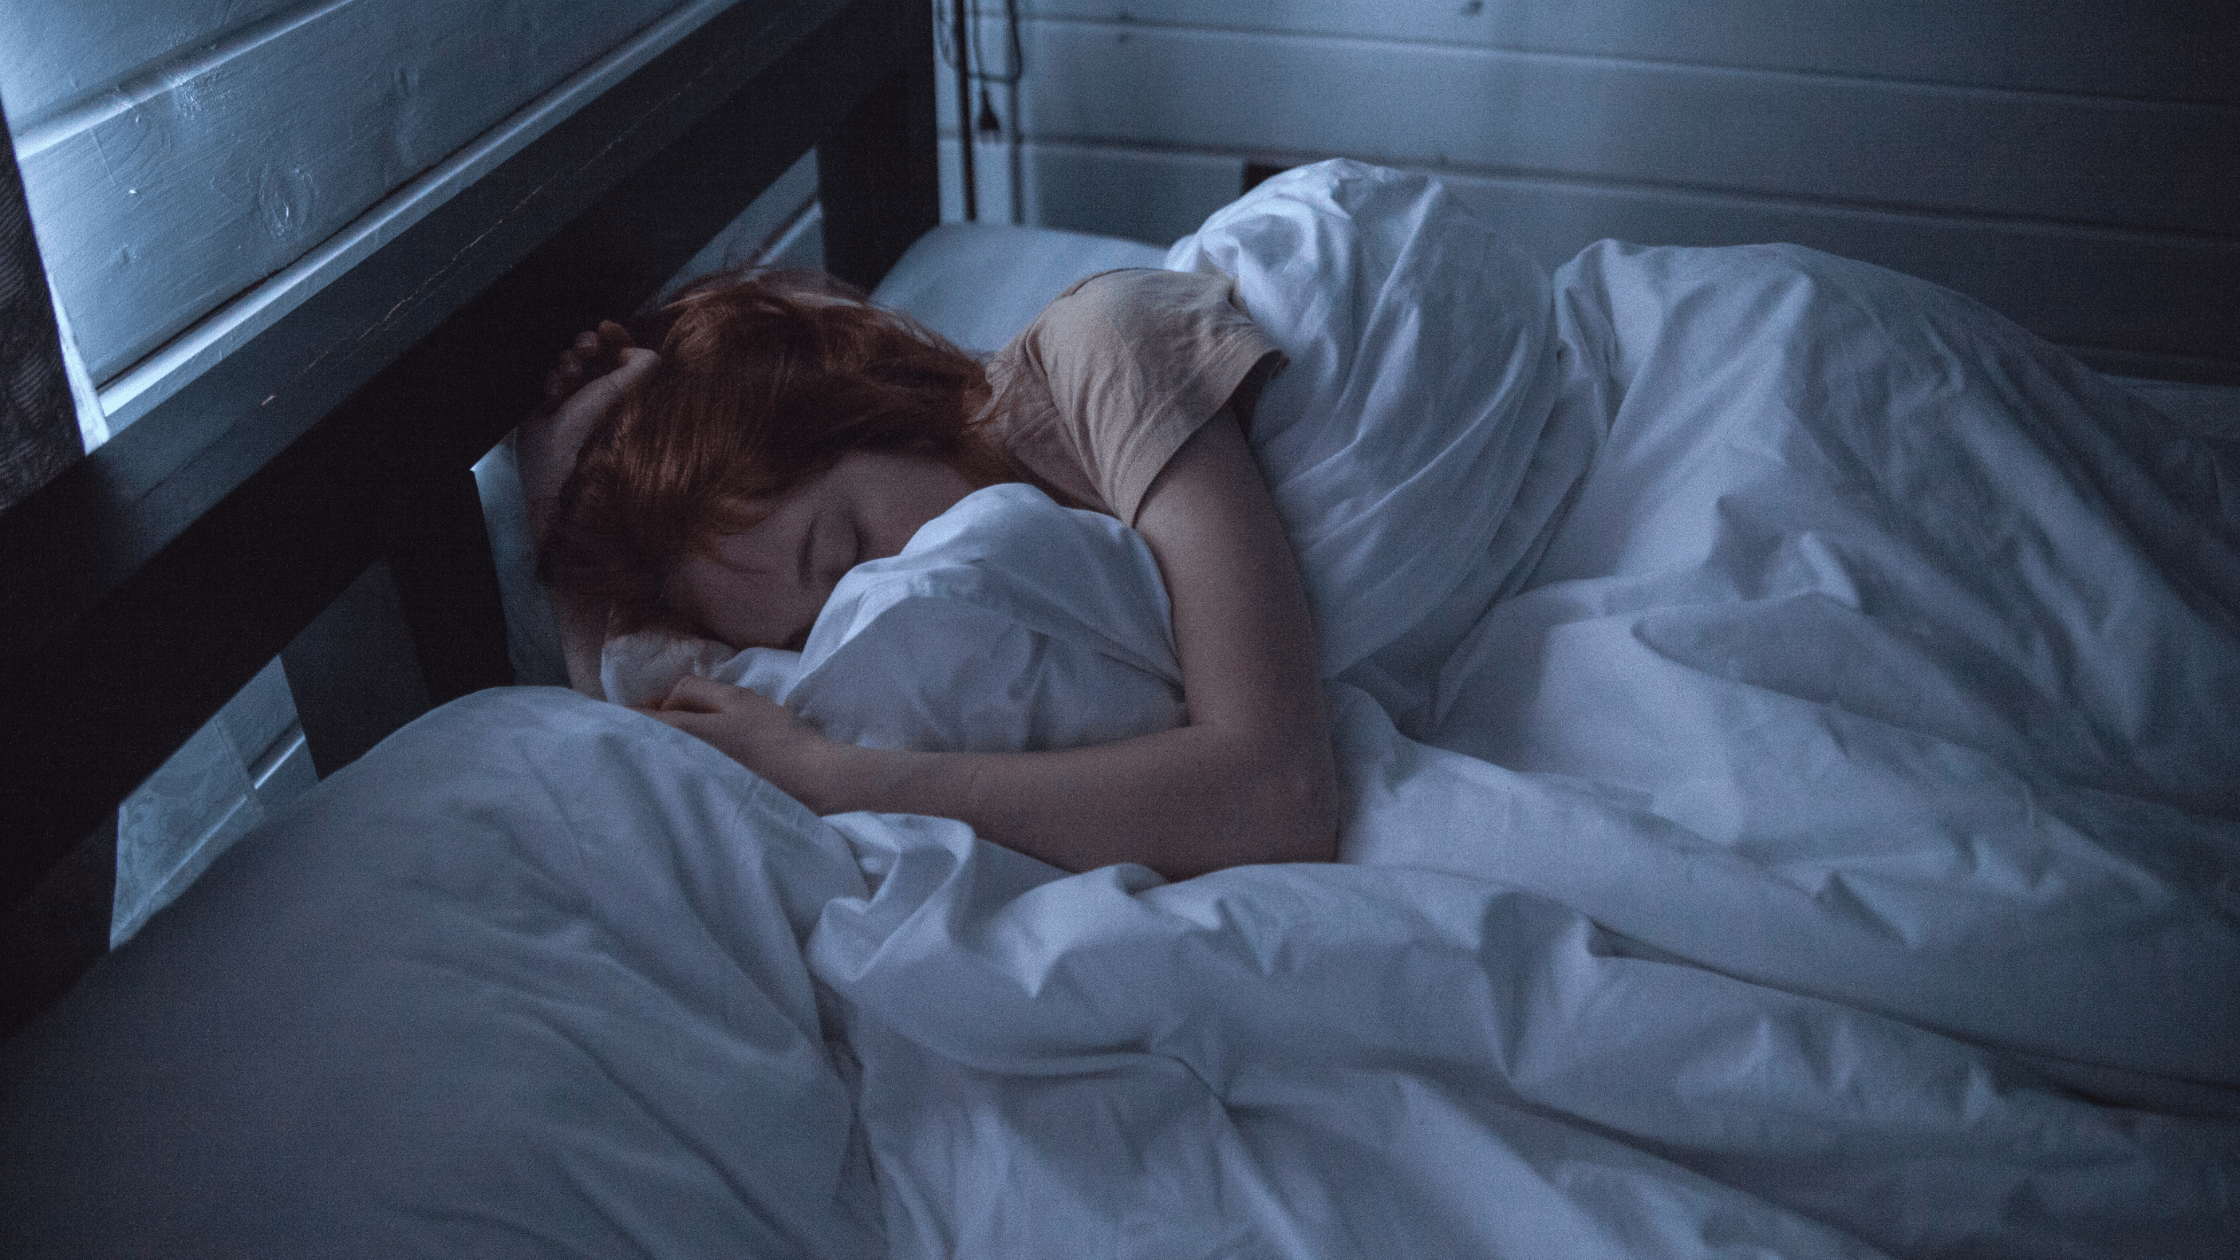 Does Inflammation Affect Sleep? How To Decrease Inflammation and Sleep Better